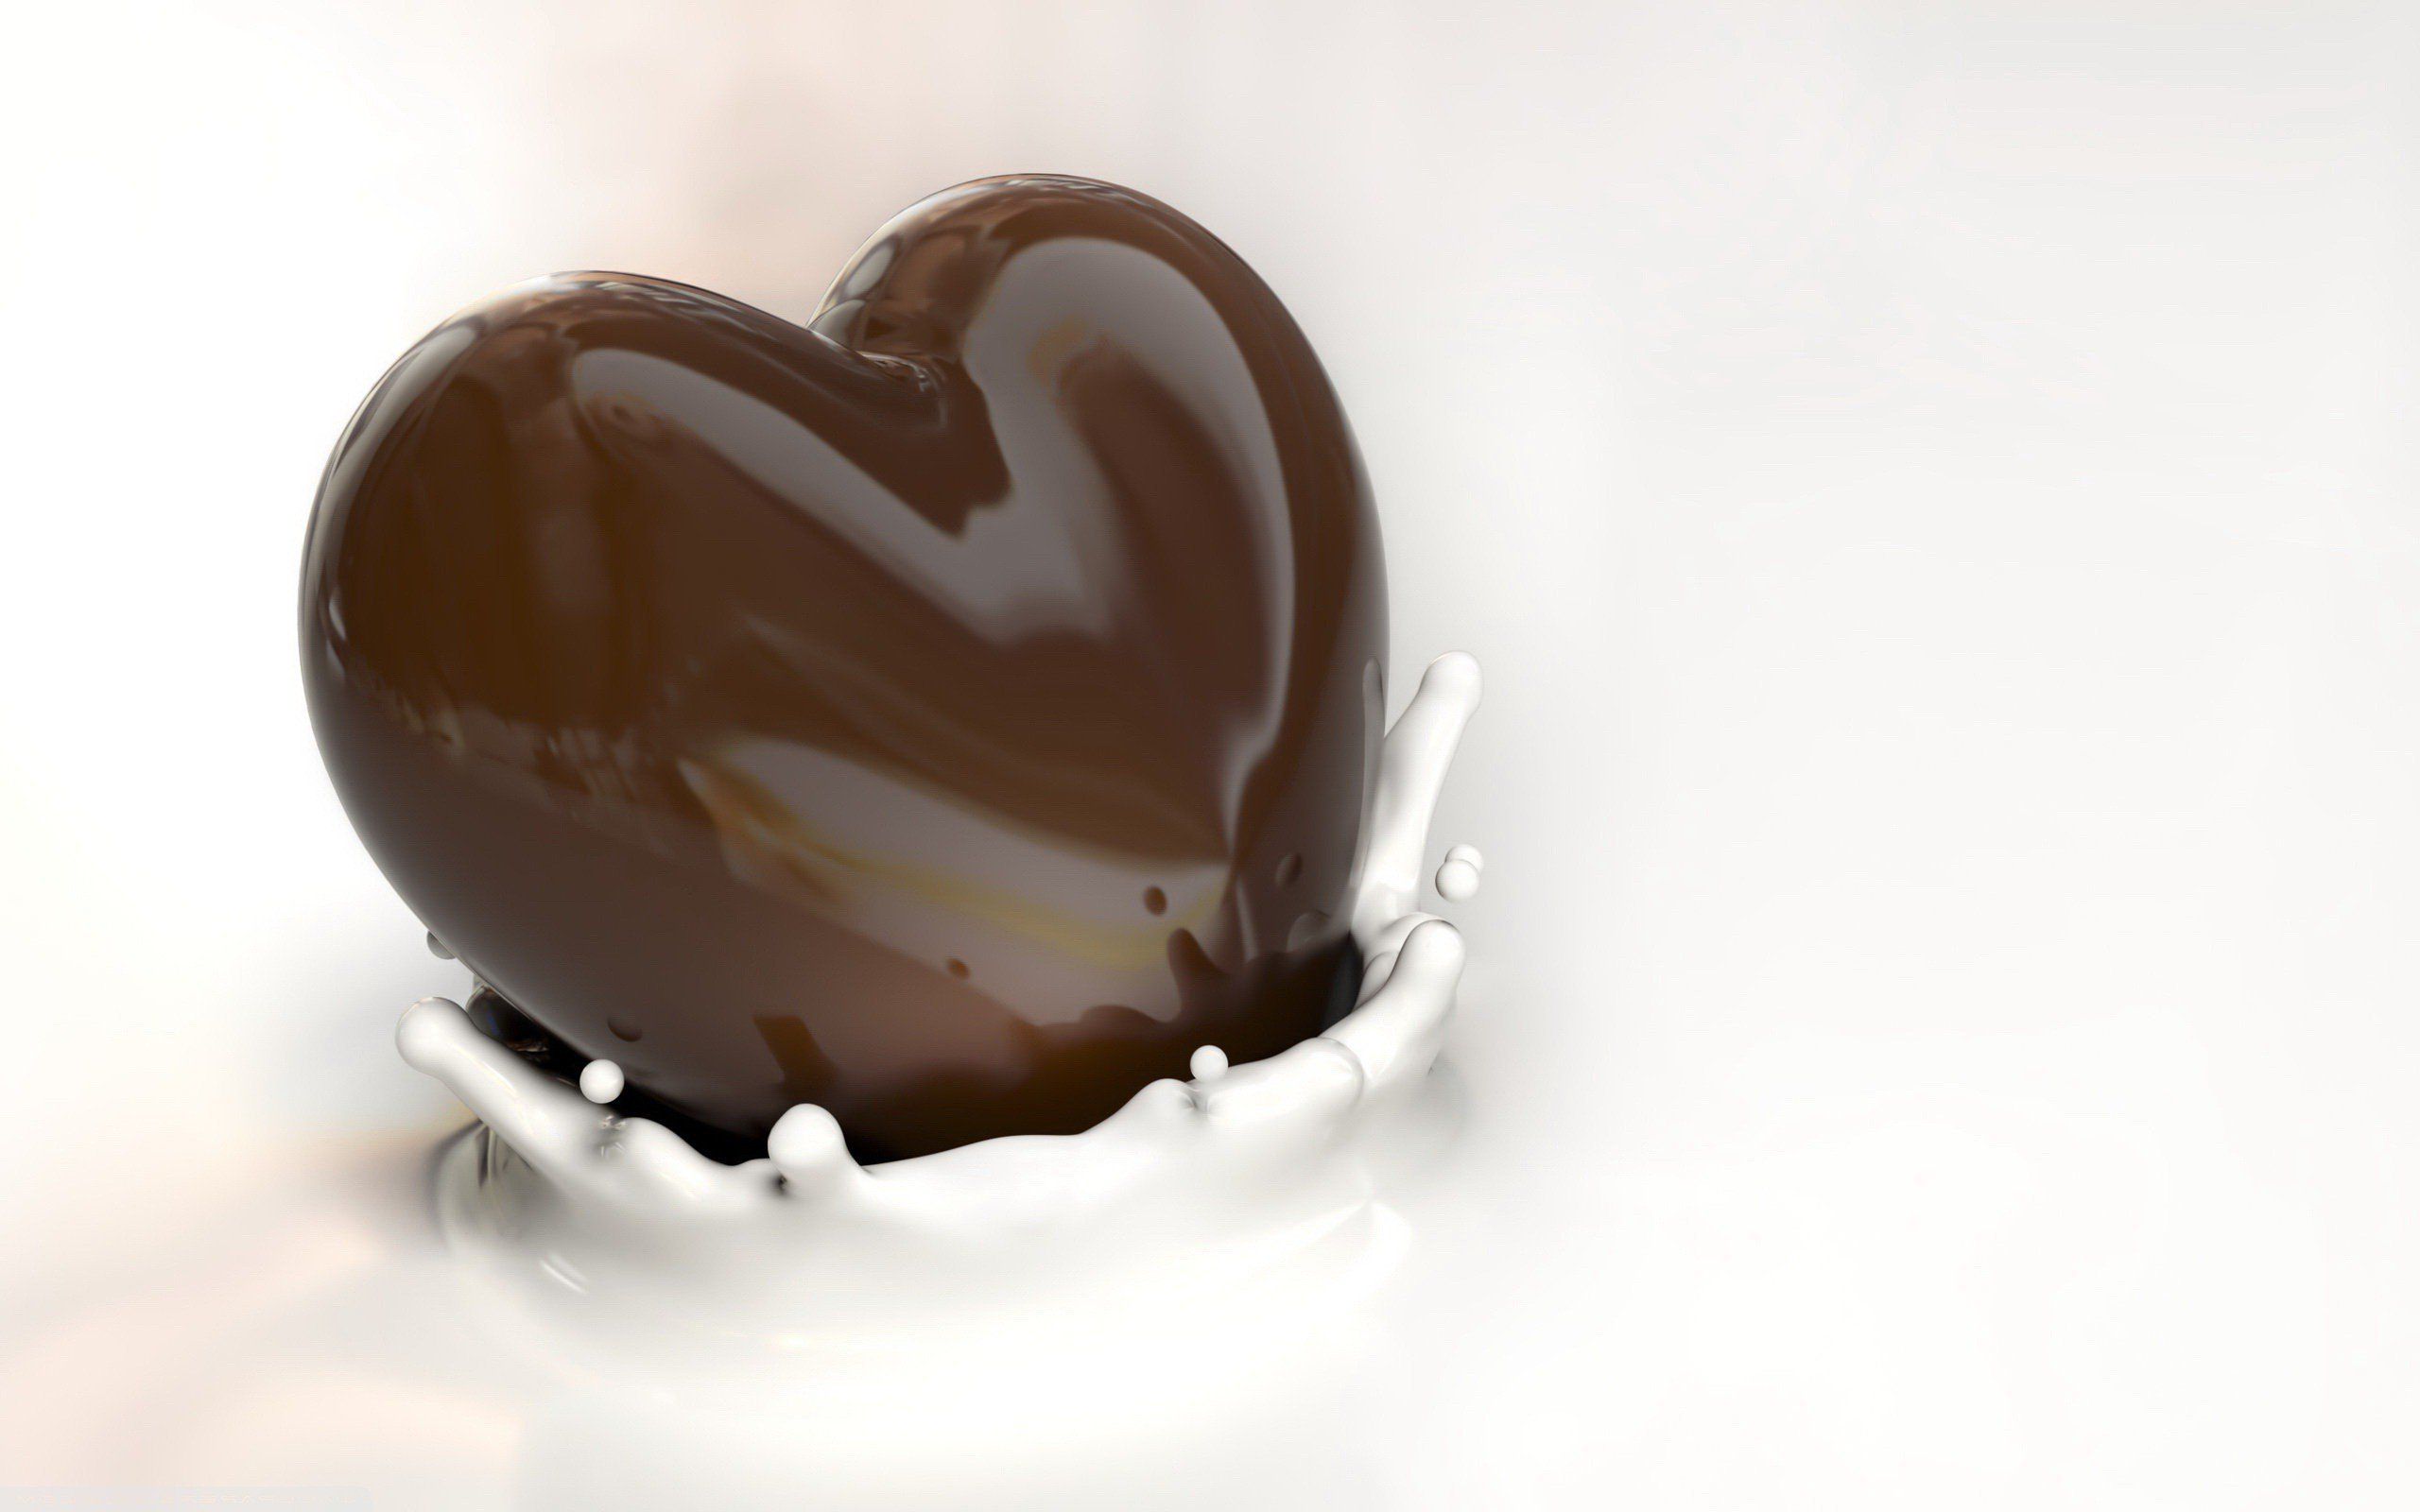 Chocolate Love 720P HD 4k Wallpaper, Image, Background, Photo and Picture